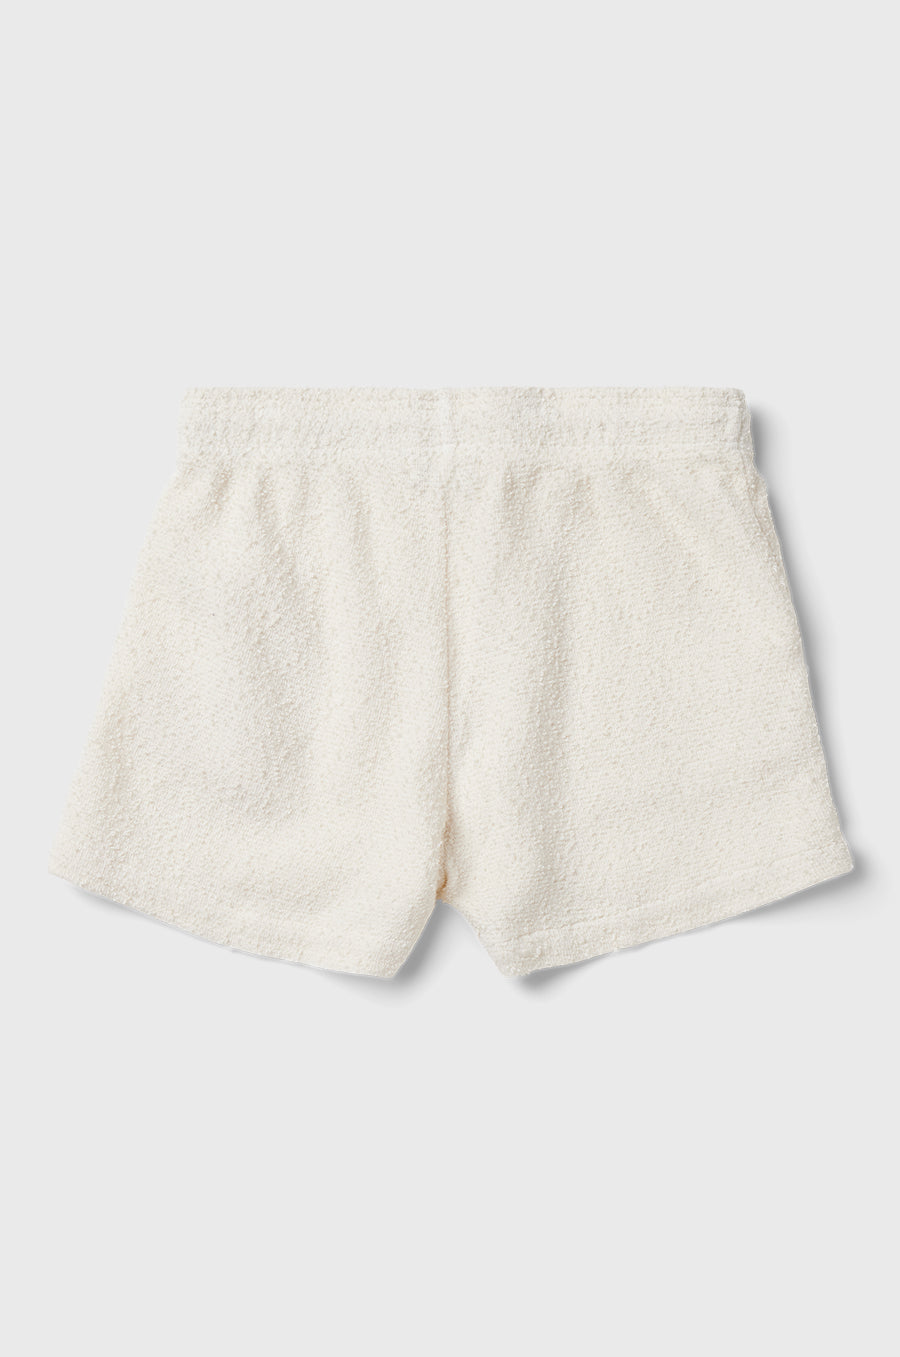 the lady & the sailor Weekend Short in Vanilla Boucle.